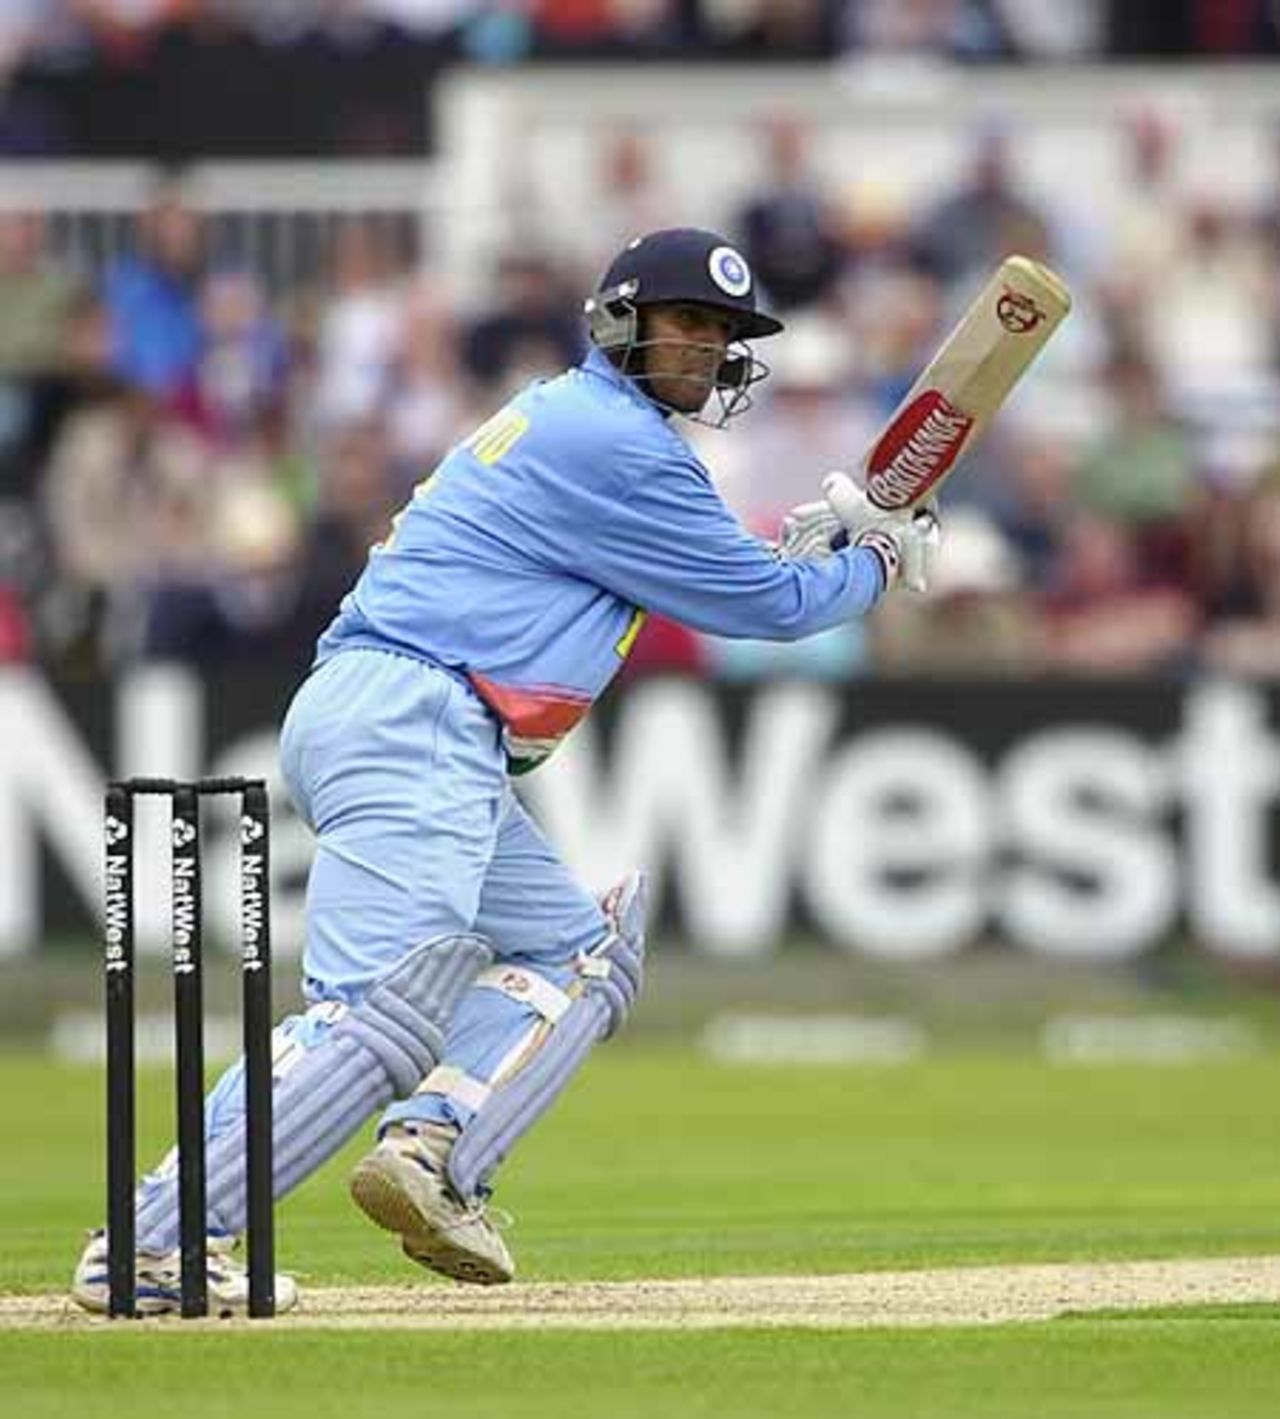 Rahul Dravid pushes out in his innings of 82, England v India at Chester-le-Street, July 2002